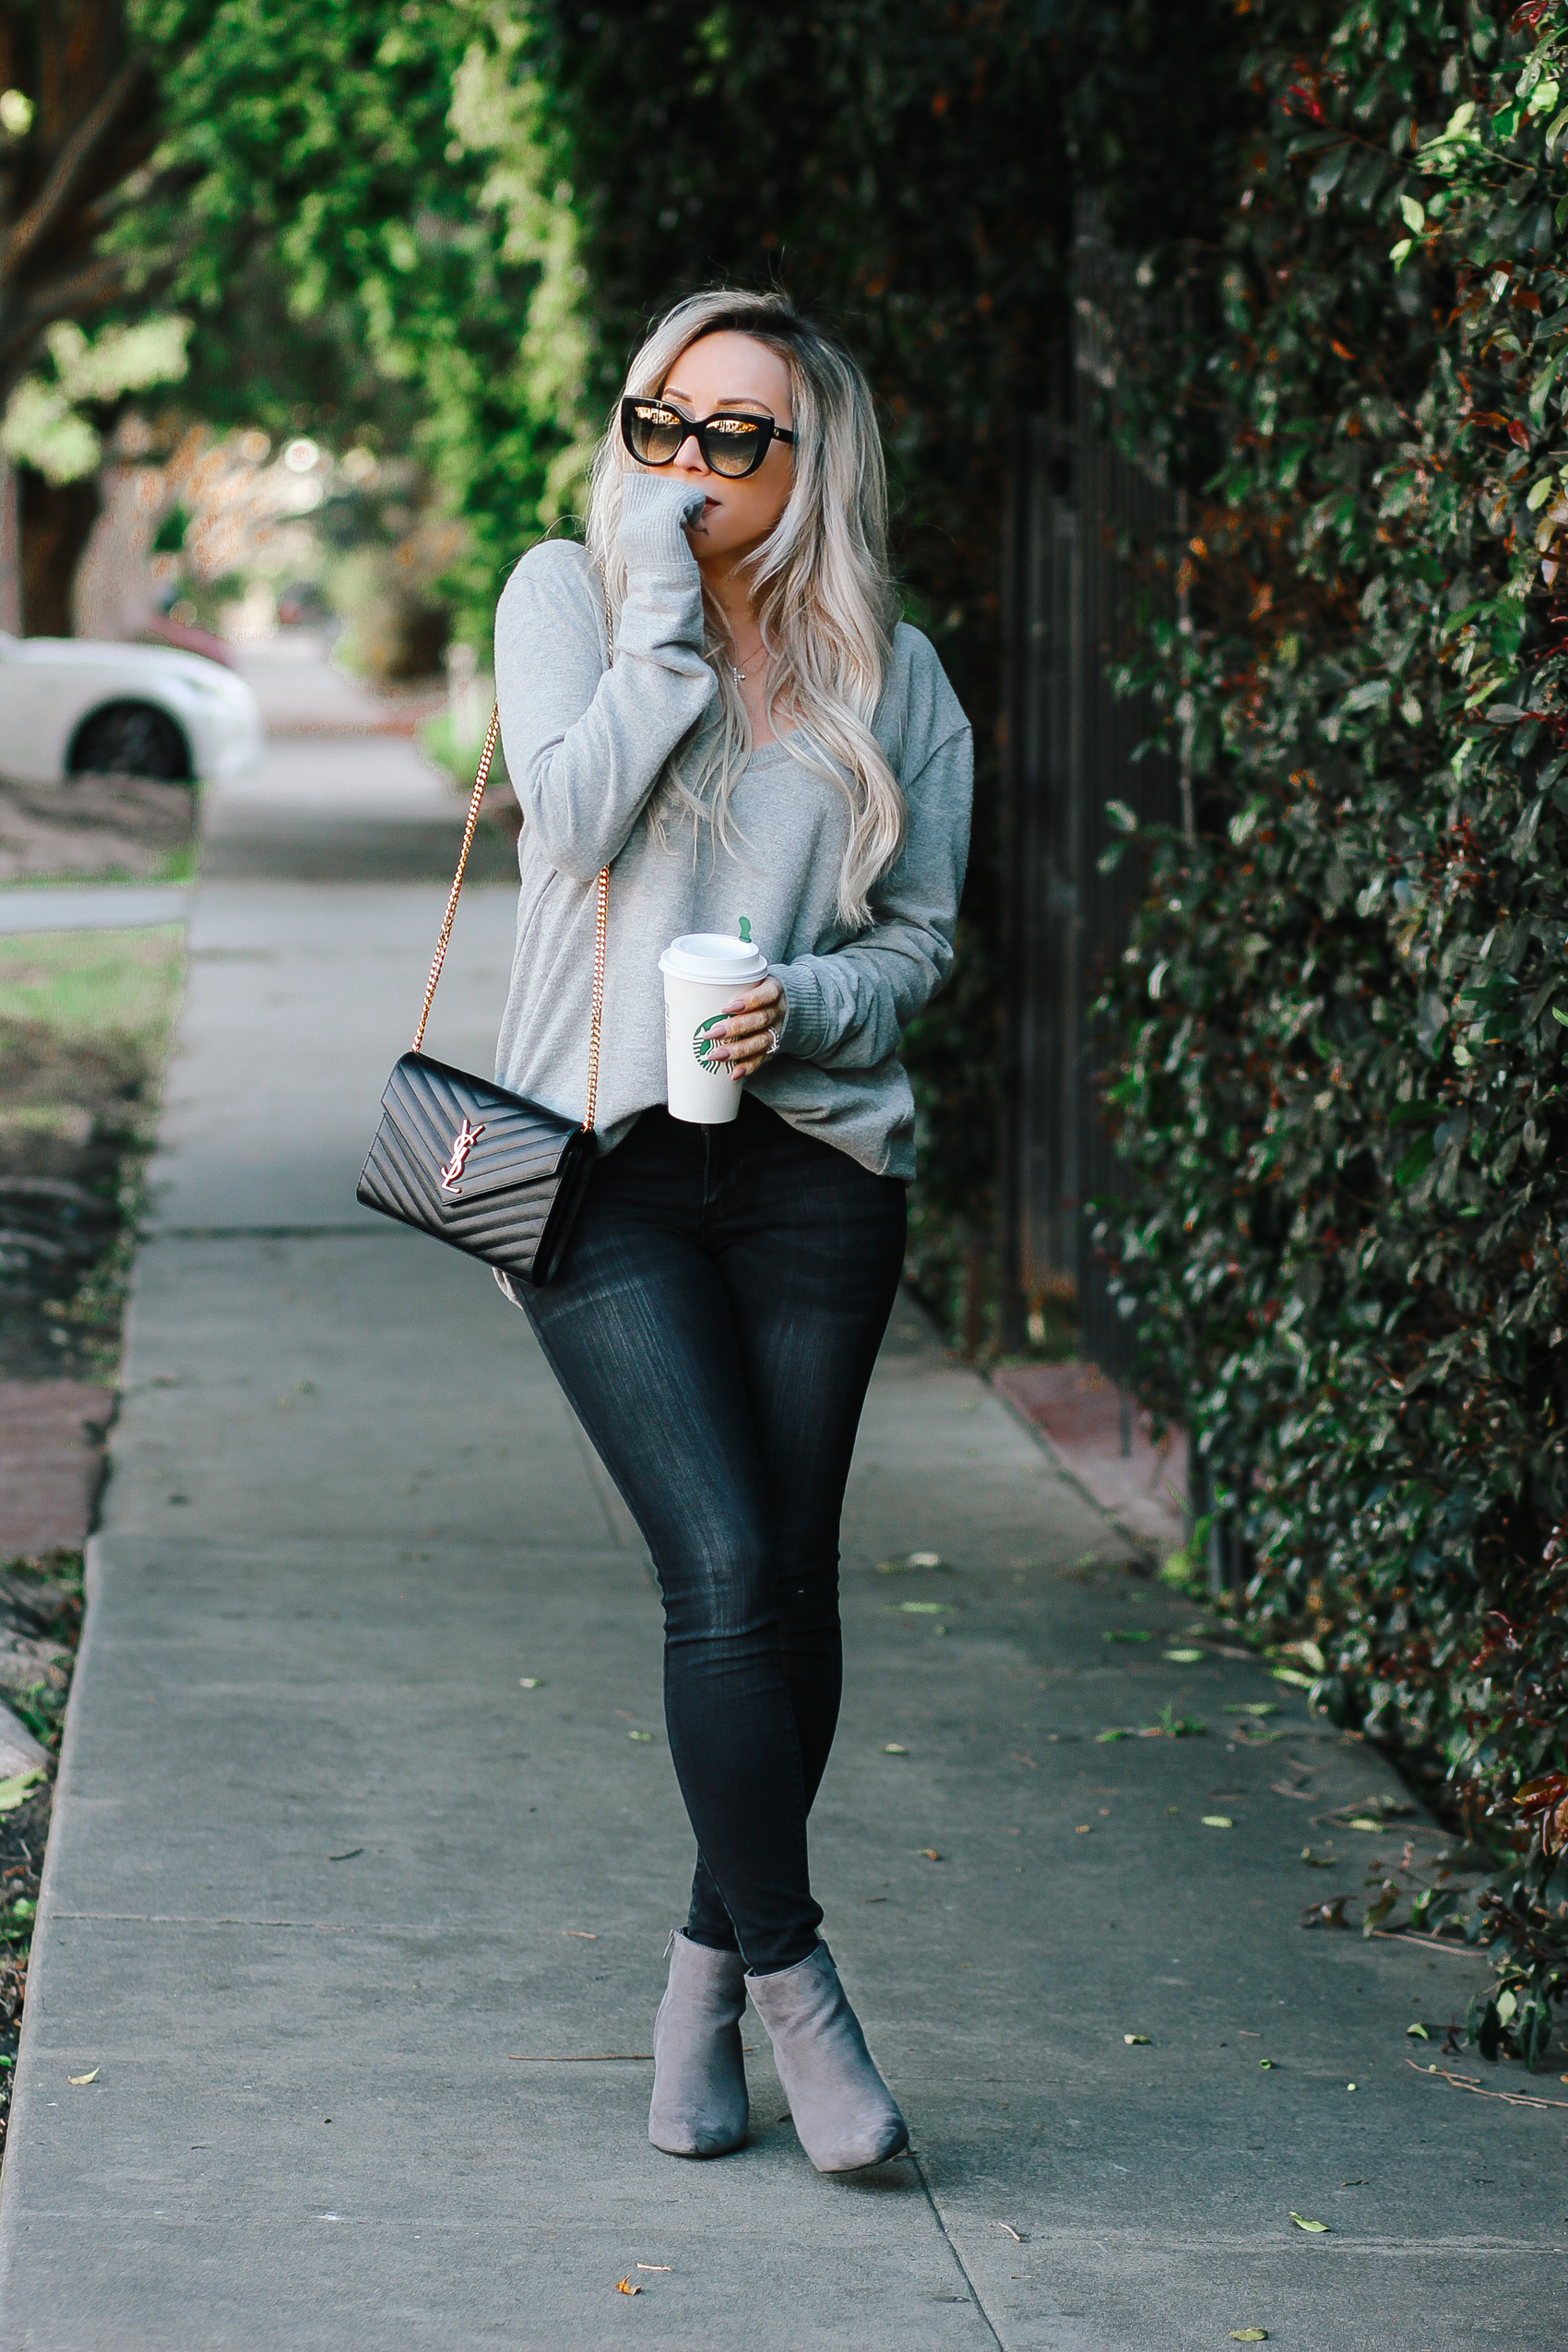 Grey Oversized Pullover | Black Jeans | Black YSL Bag | Gucci Sunglasses | Blondie in the city by Hayley Larue